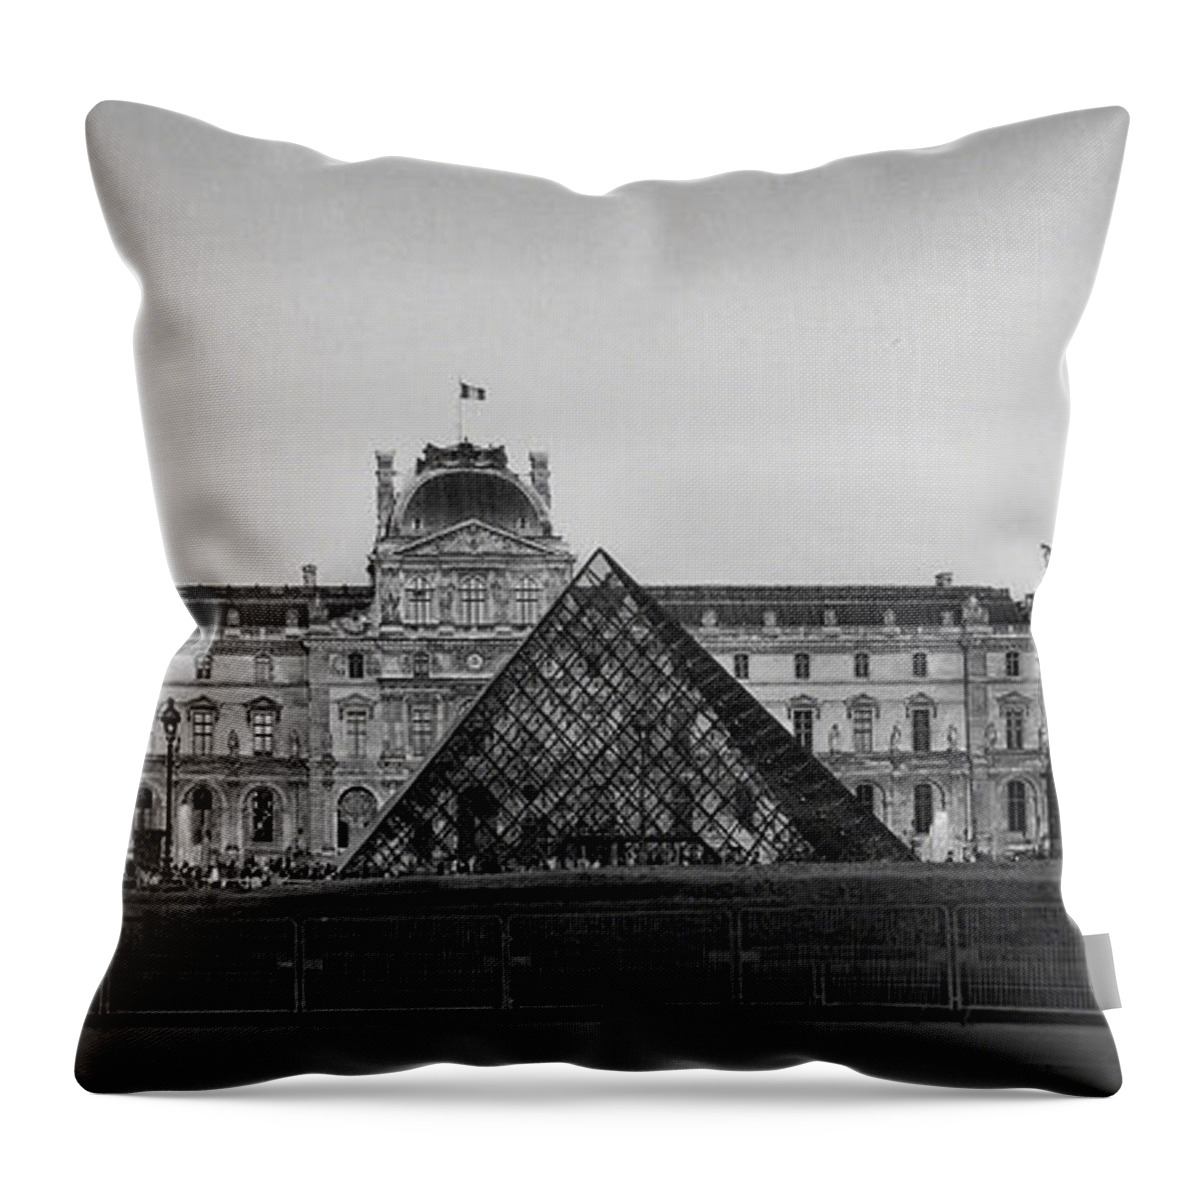 Louvre Throw Pillow featuring the photograph The Full Louvre Denise Dube by Denise Dube